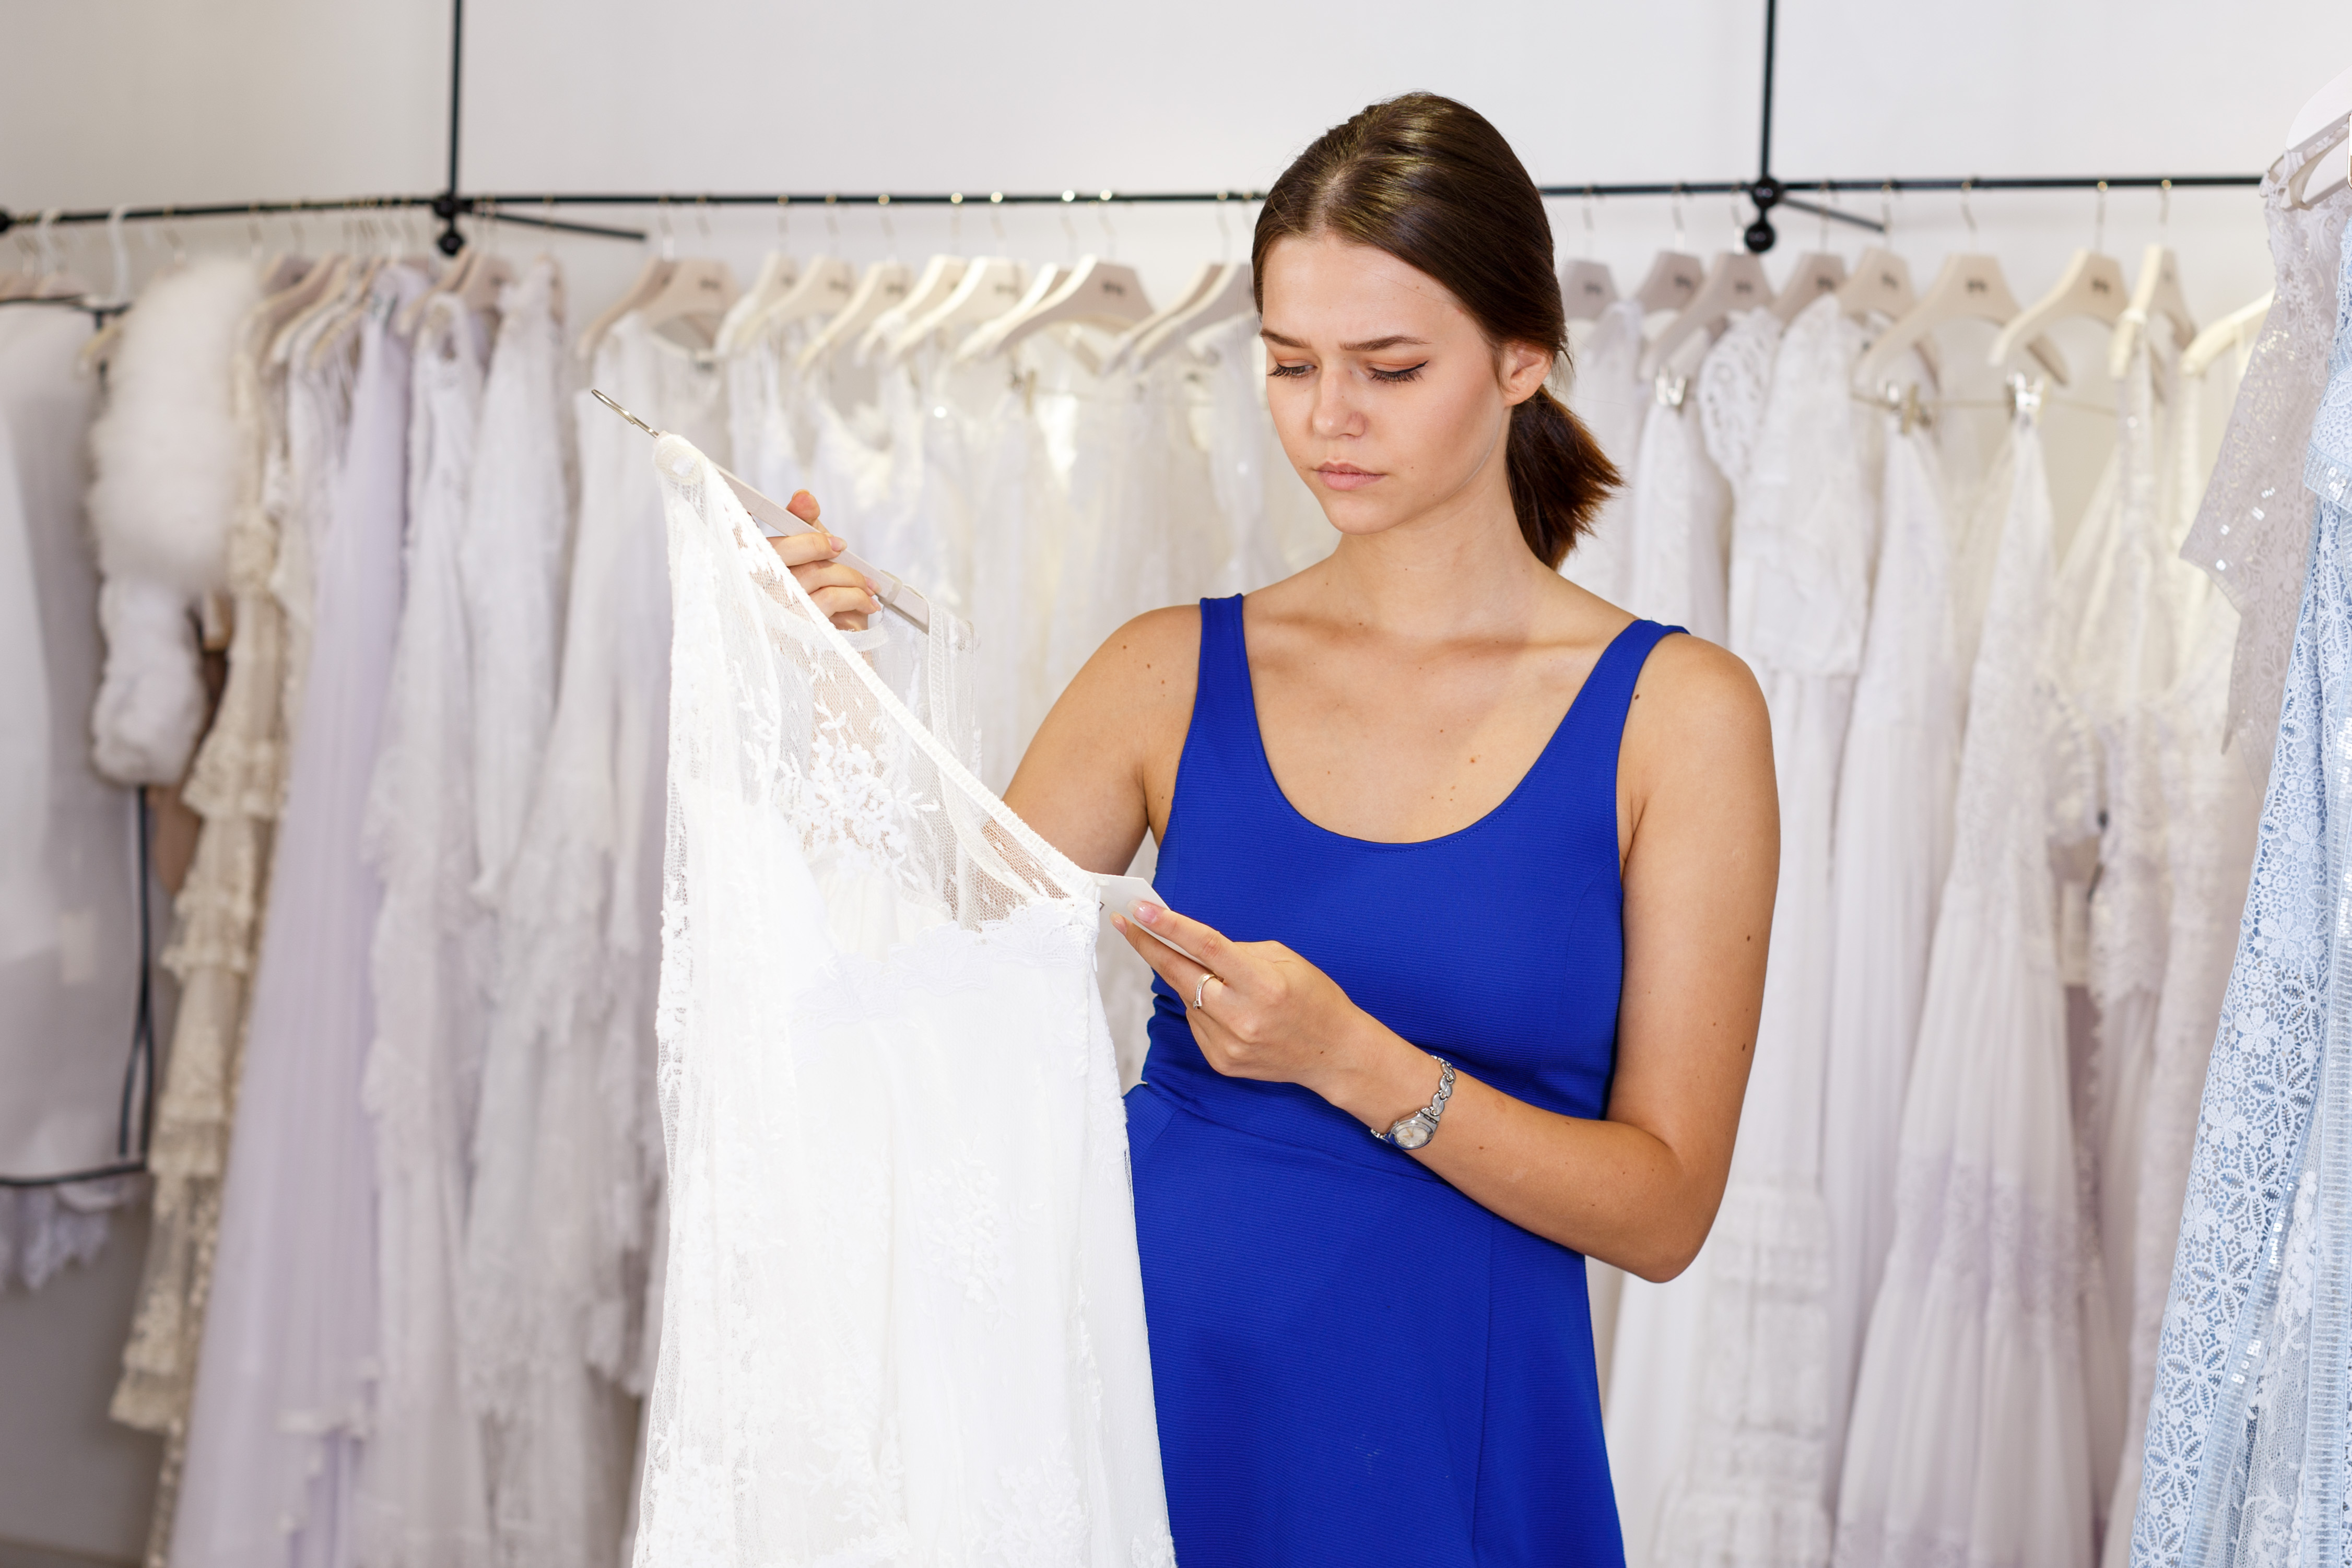 A woman looking sad as she holds a wedding dress | Source: Shutterstock